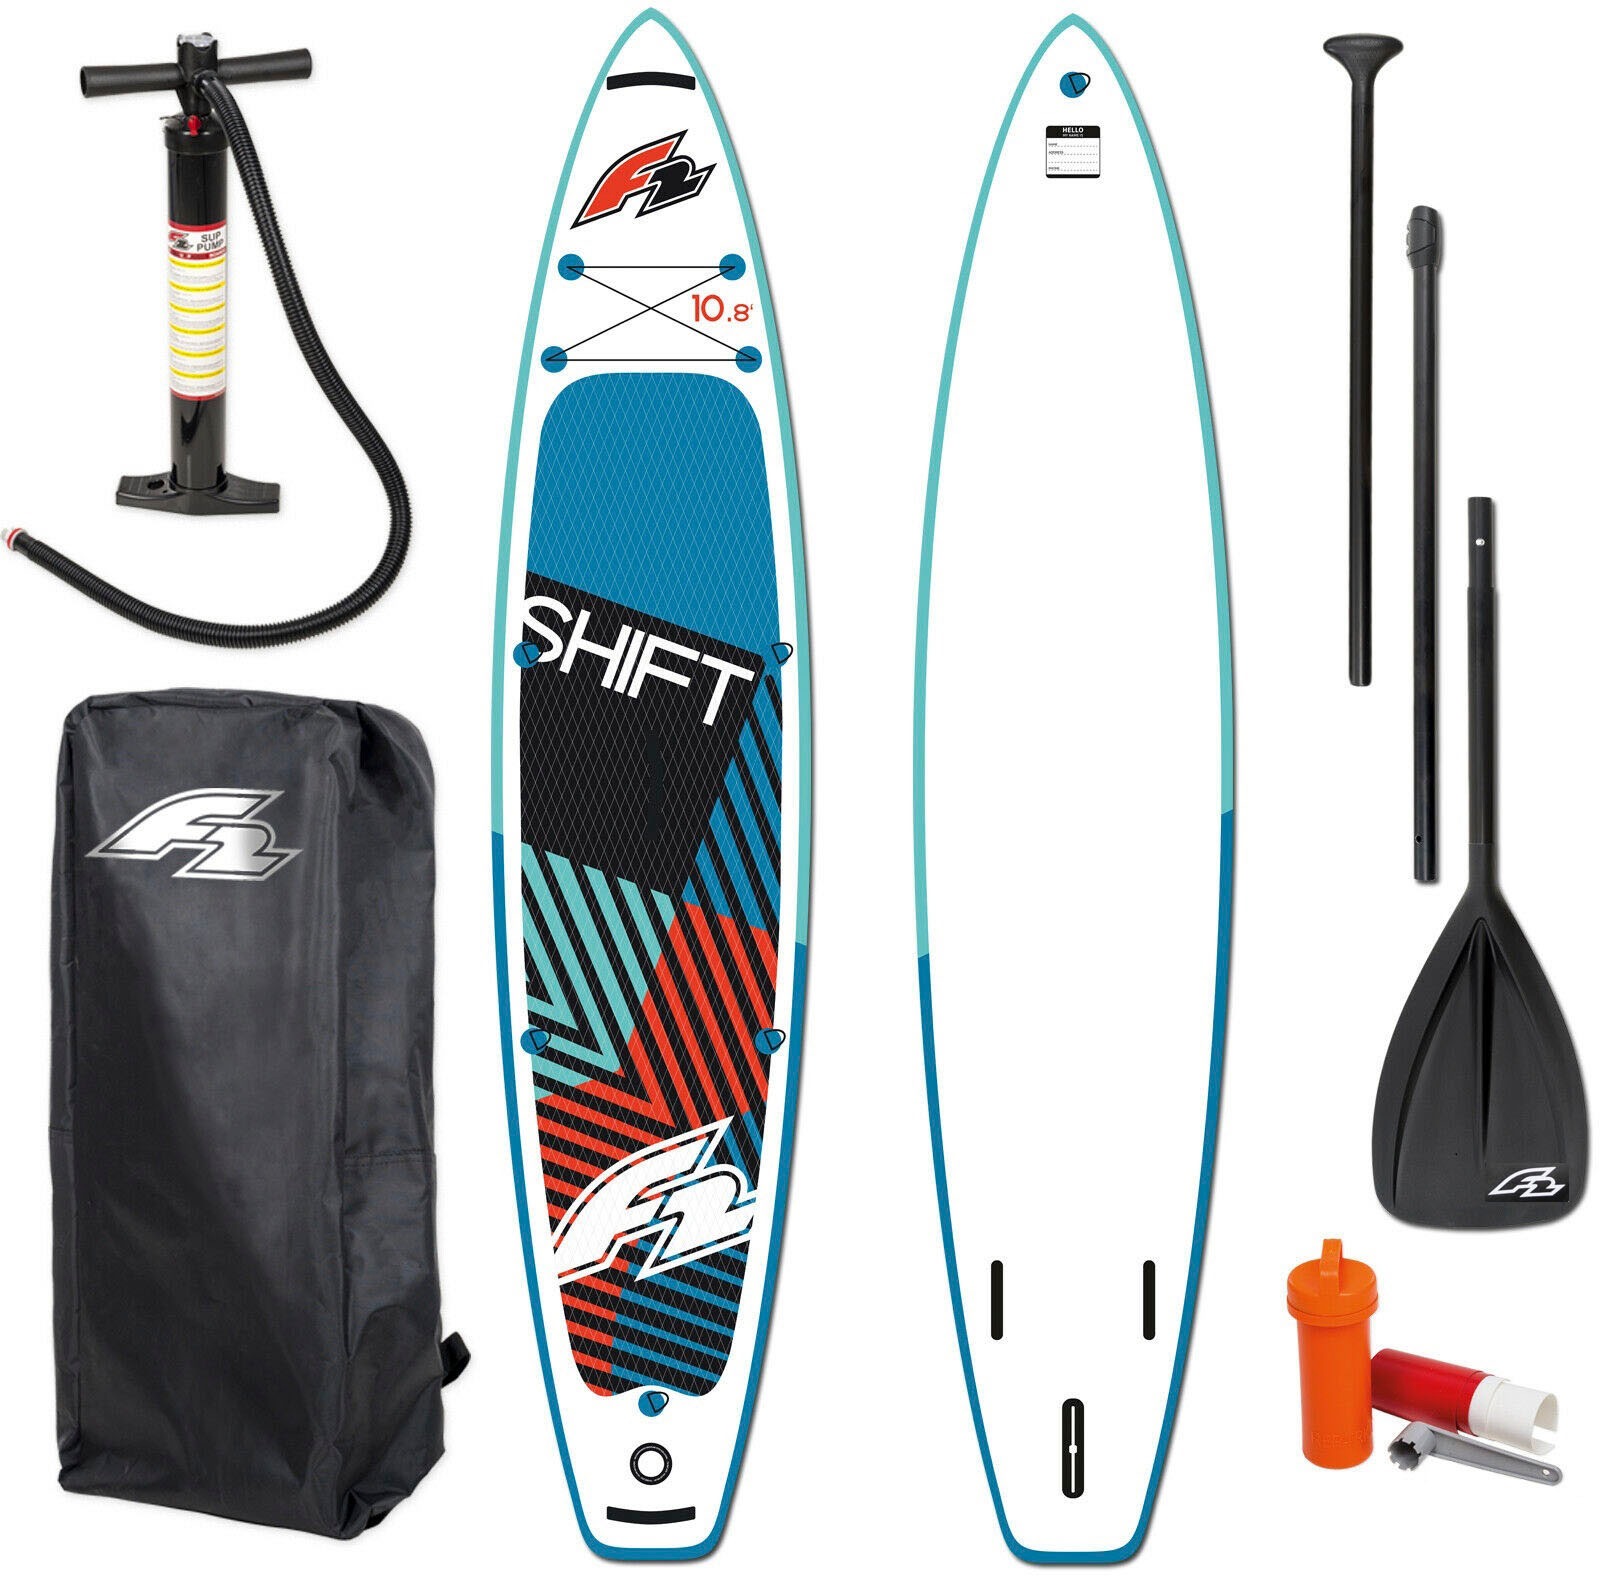 Shop OTTO (Packung, SUP-Board Online Inflatable 10,8«, im »Shift 5 F2 tlg.)